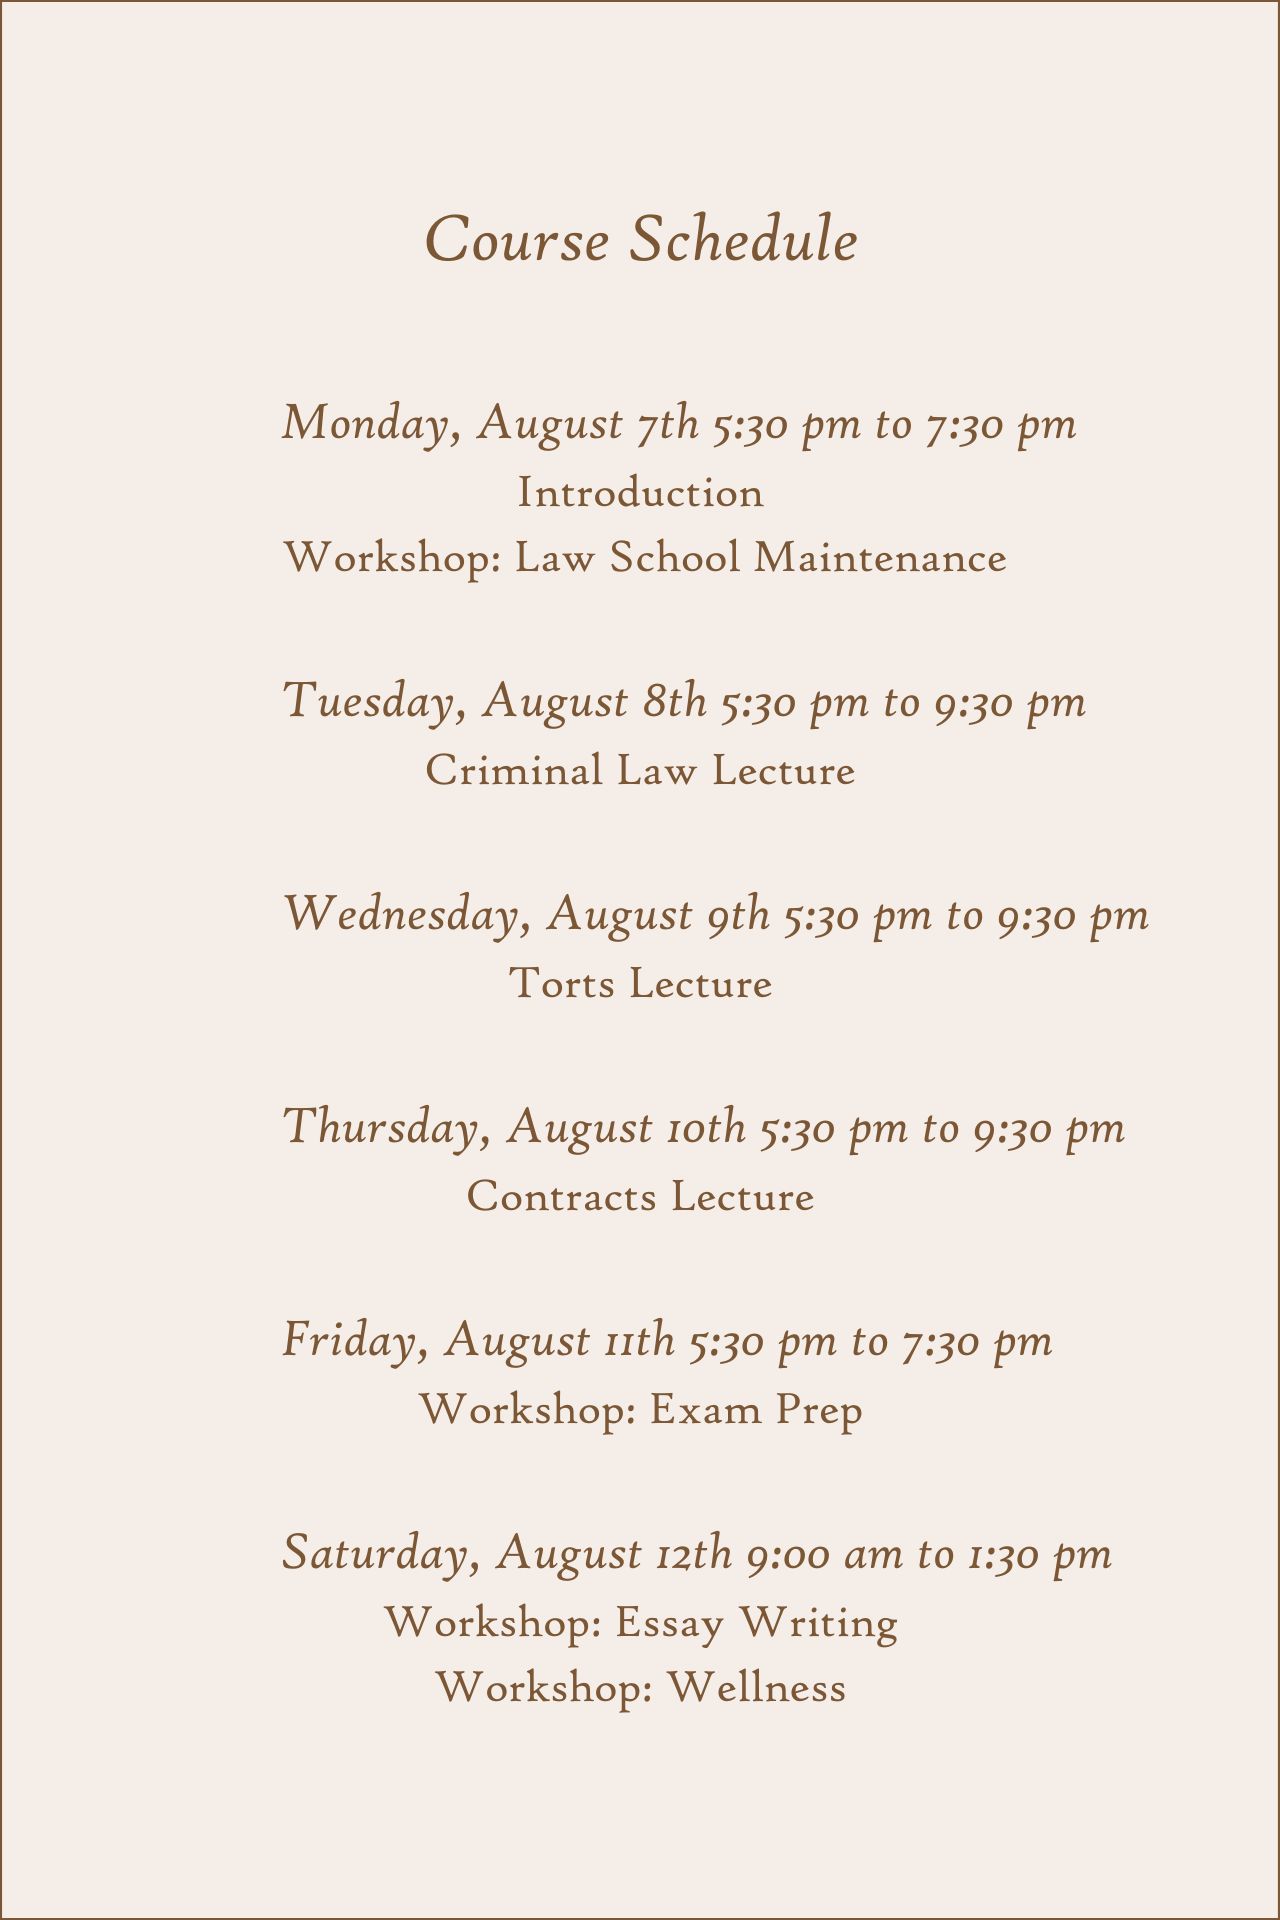 Course Schedule for Pre-Law Course Designed for Incoming First Year Law Students to Prepare for 1L